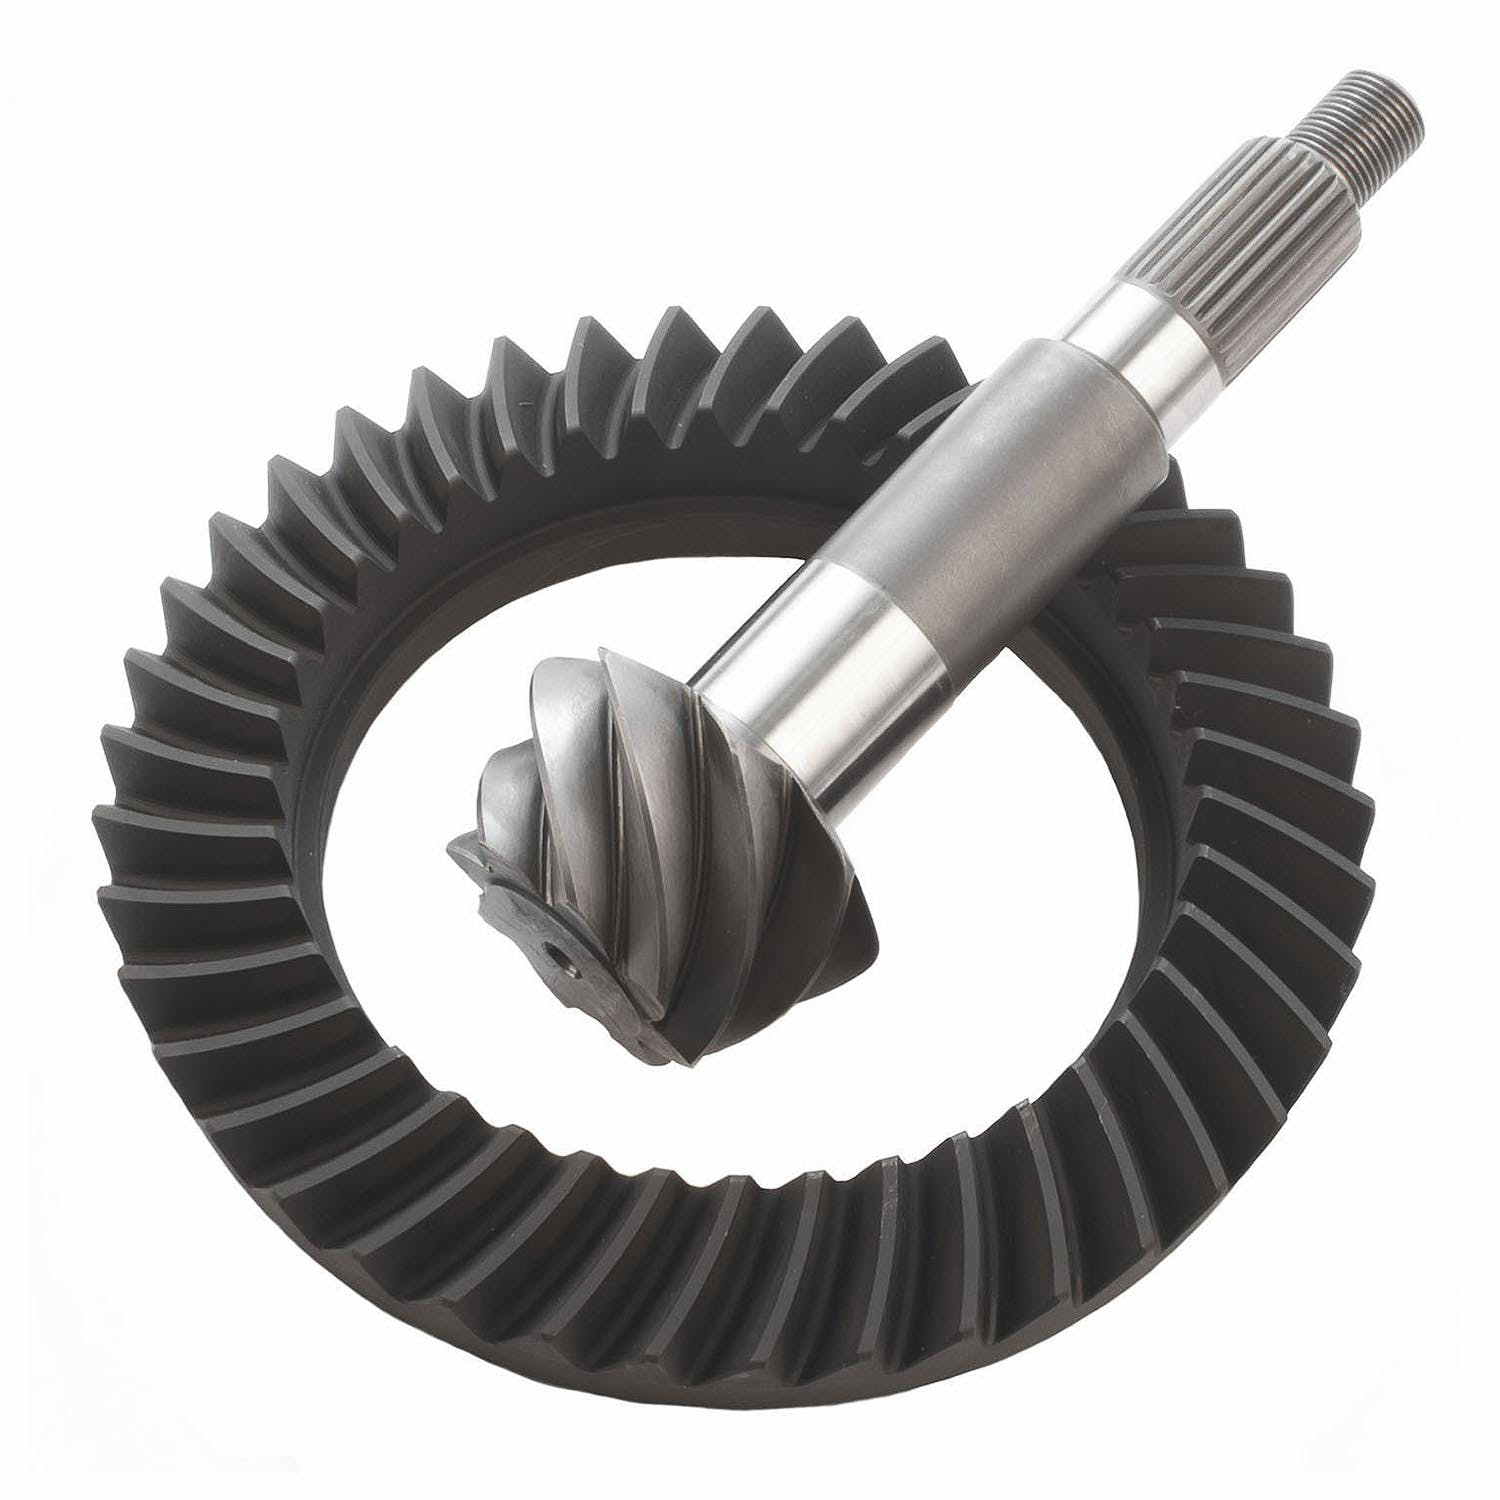 Excel D44456 Differential Ring and Pinion